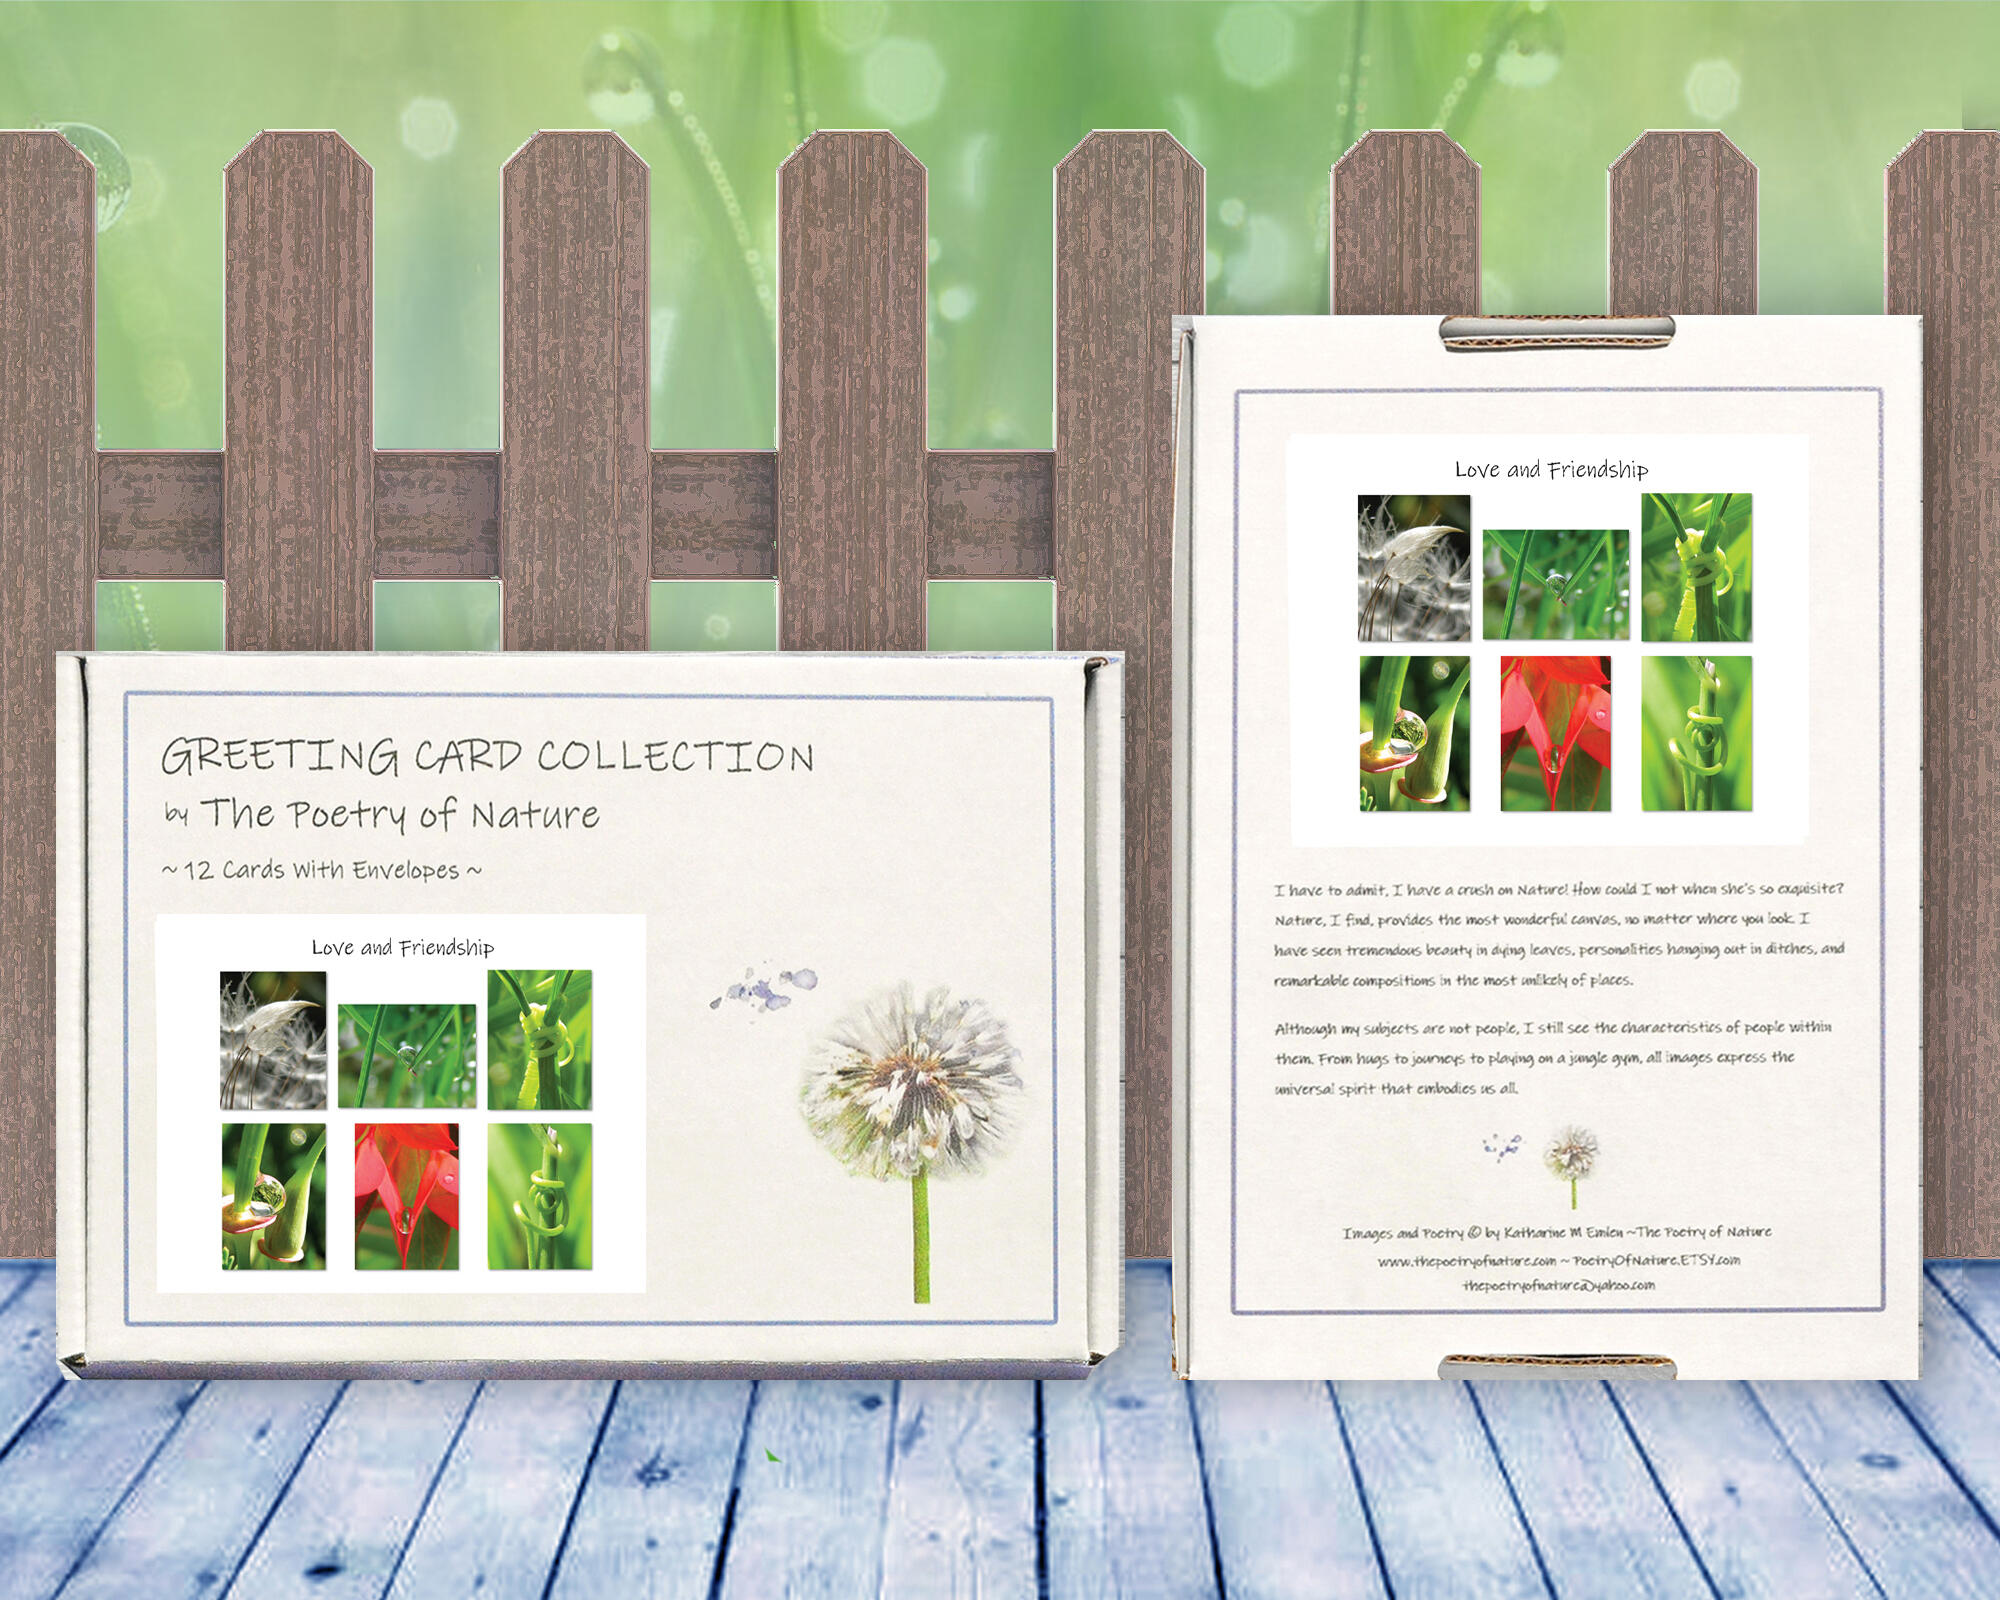 Love and Friendship - Greeting Card Collection by The Poetry of Nature